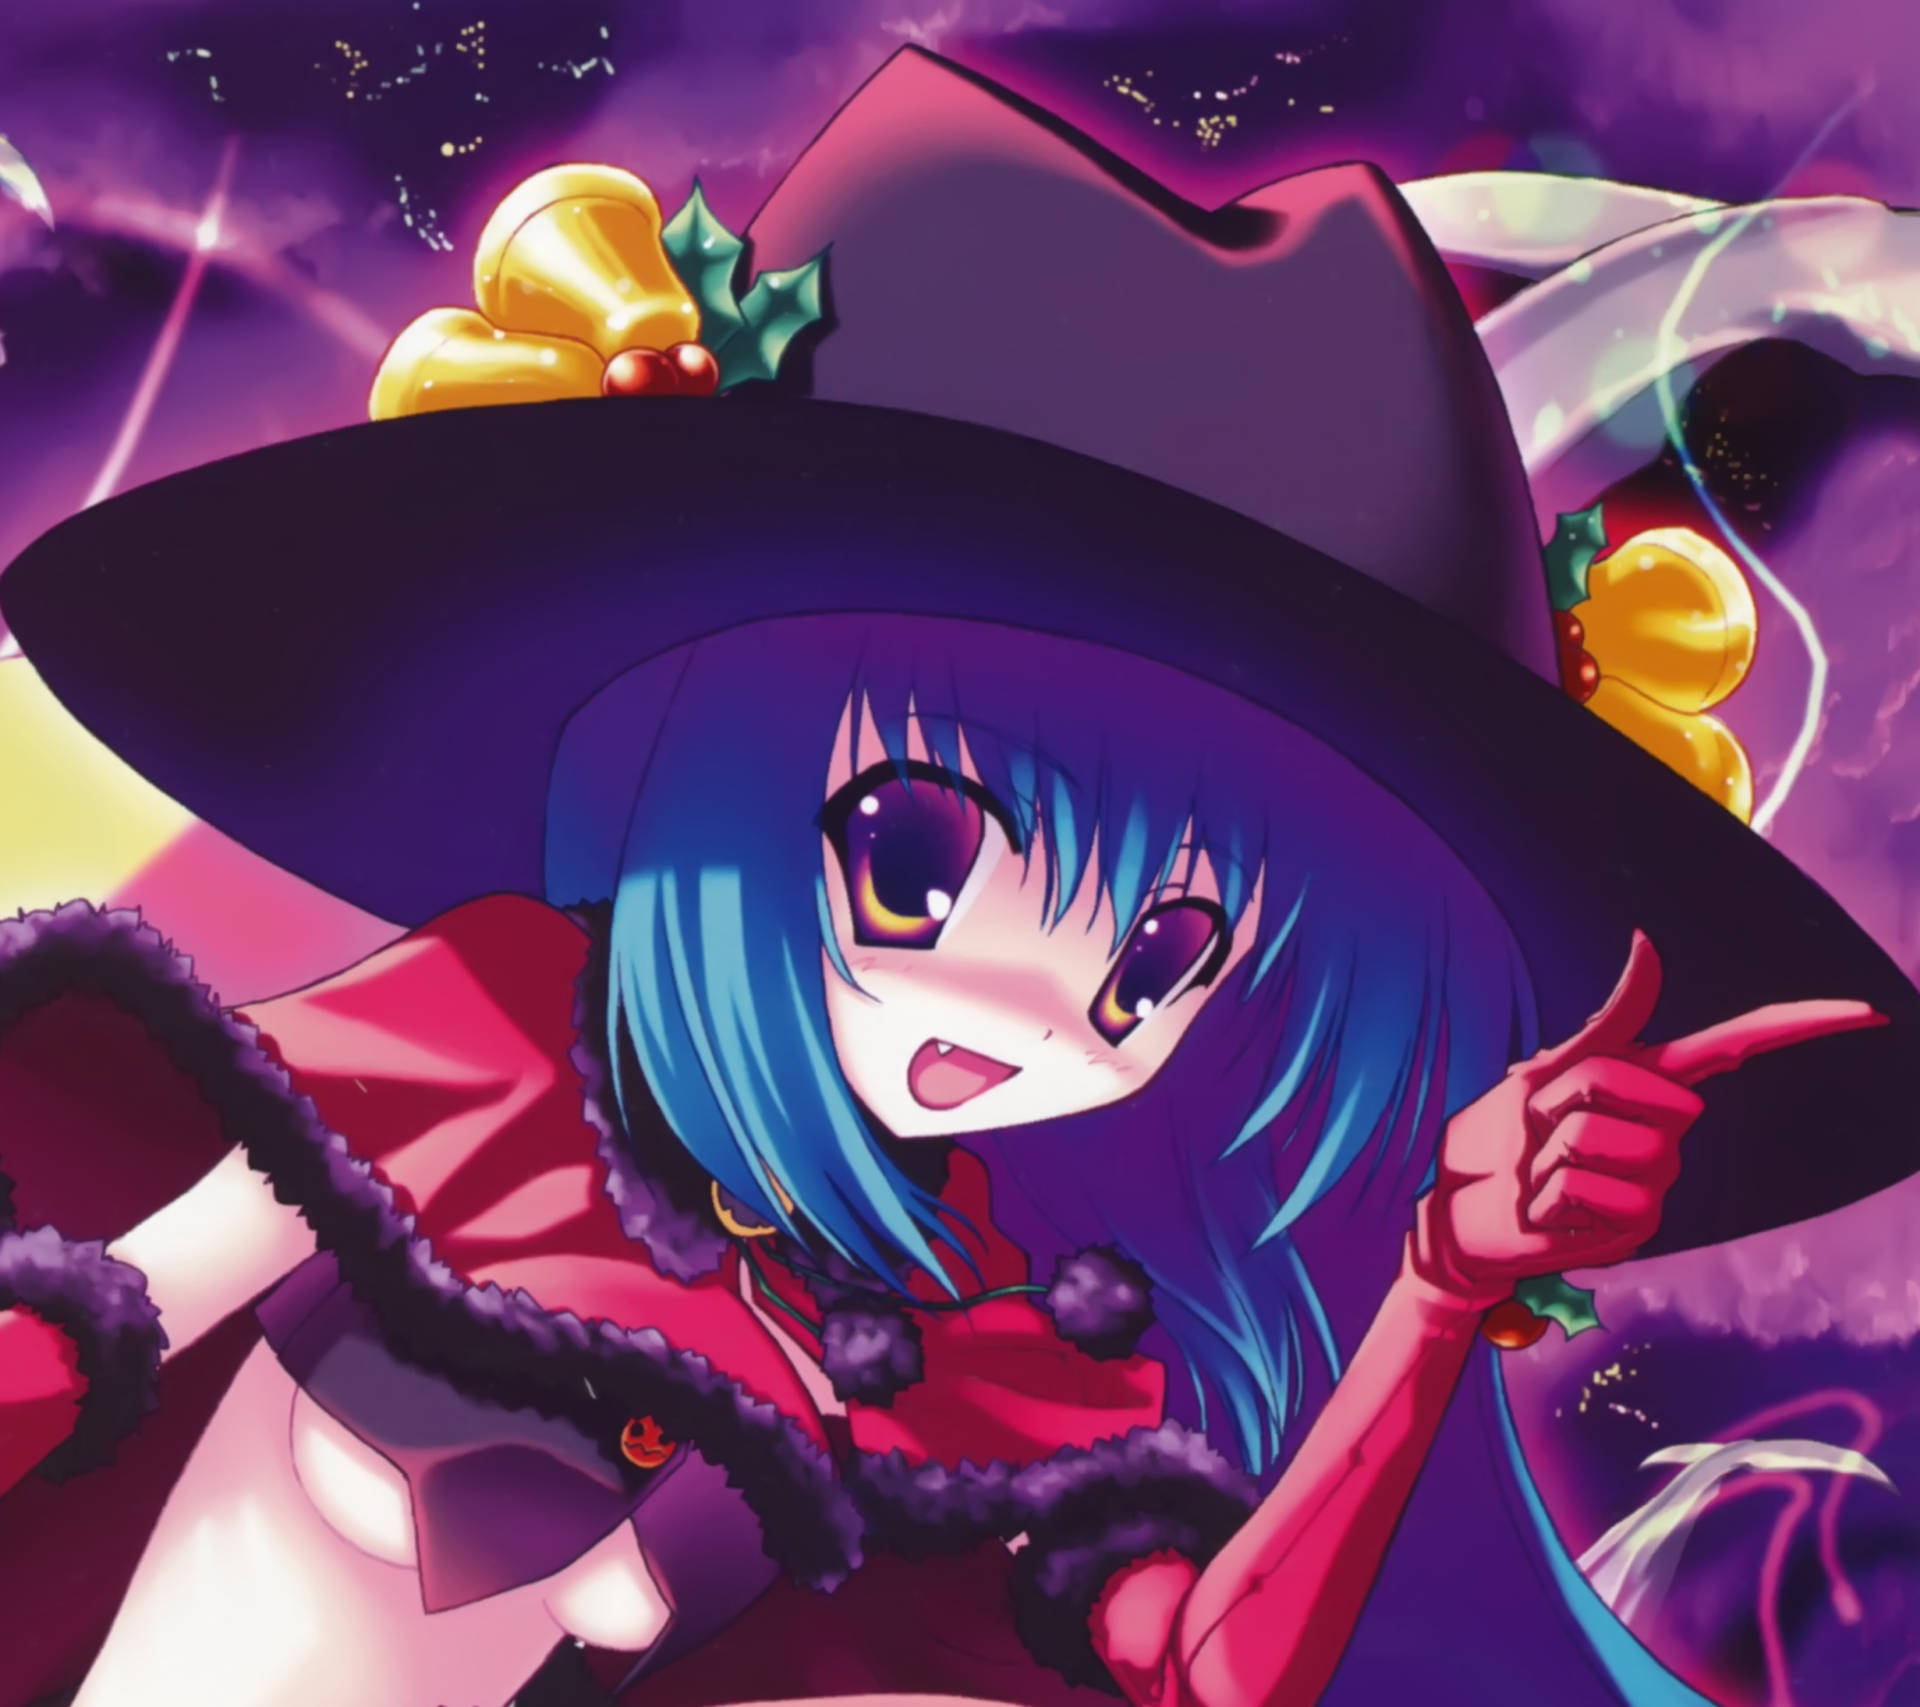 Get into the spooky spirit with these mischievous Anime characters from Halloween Wallpaper